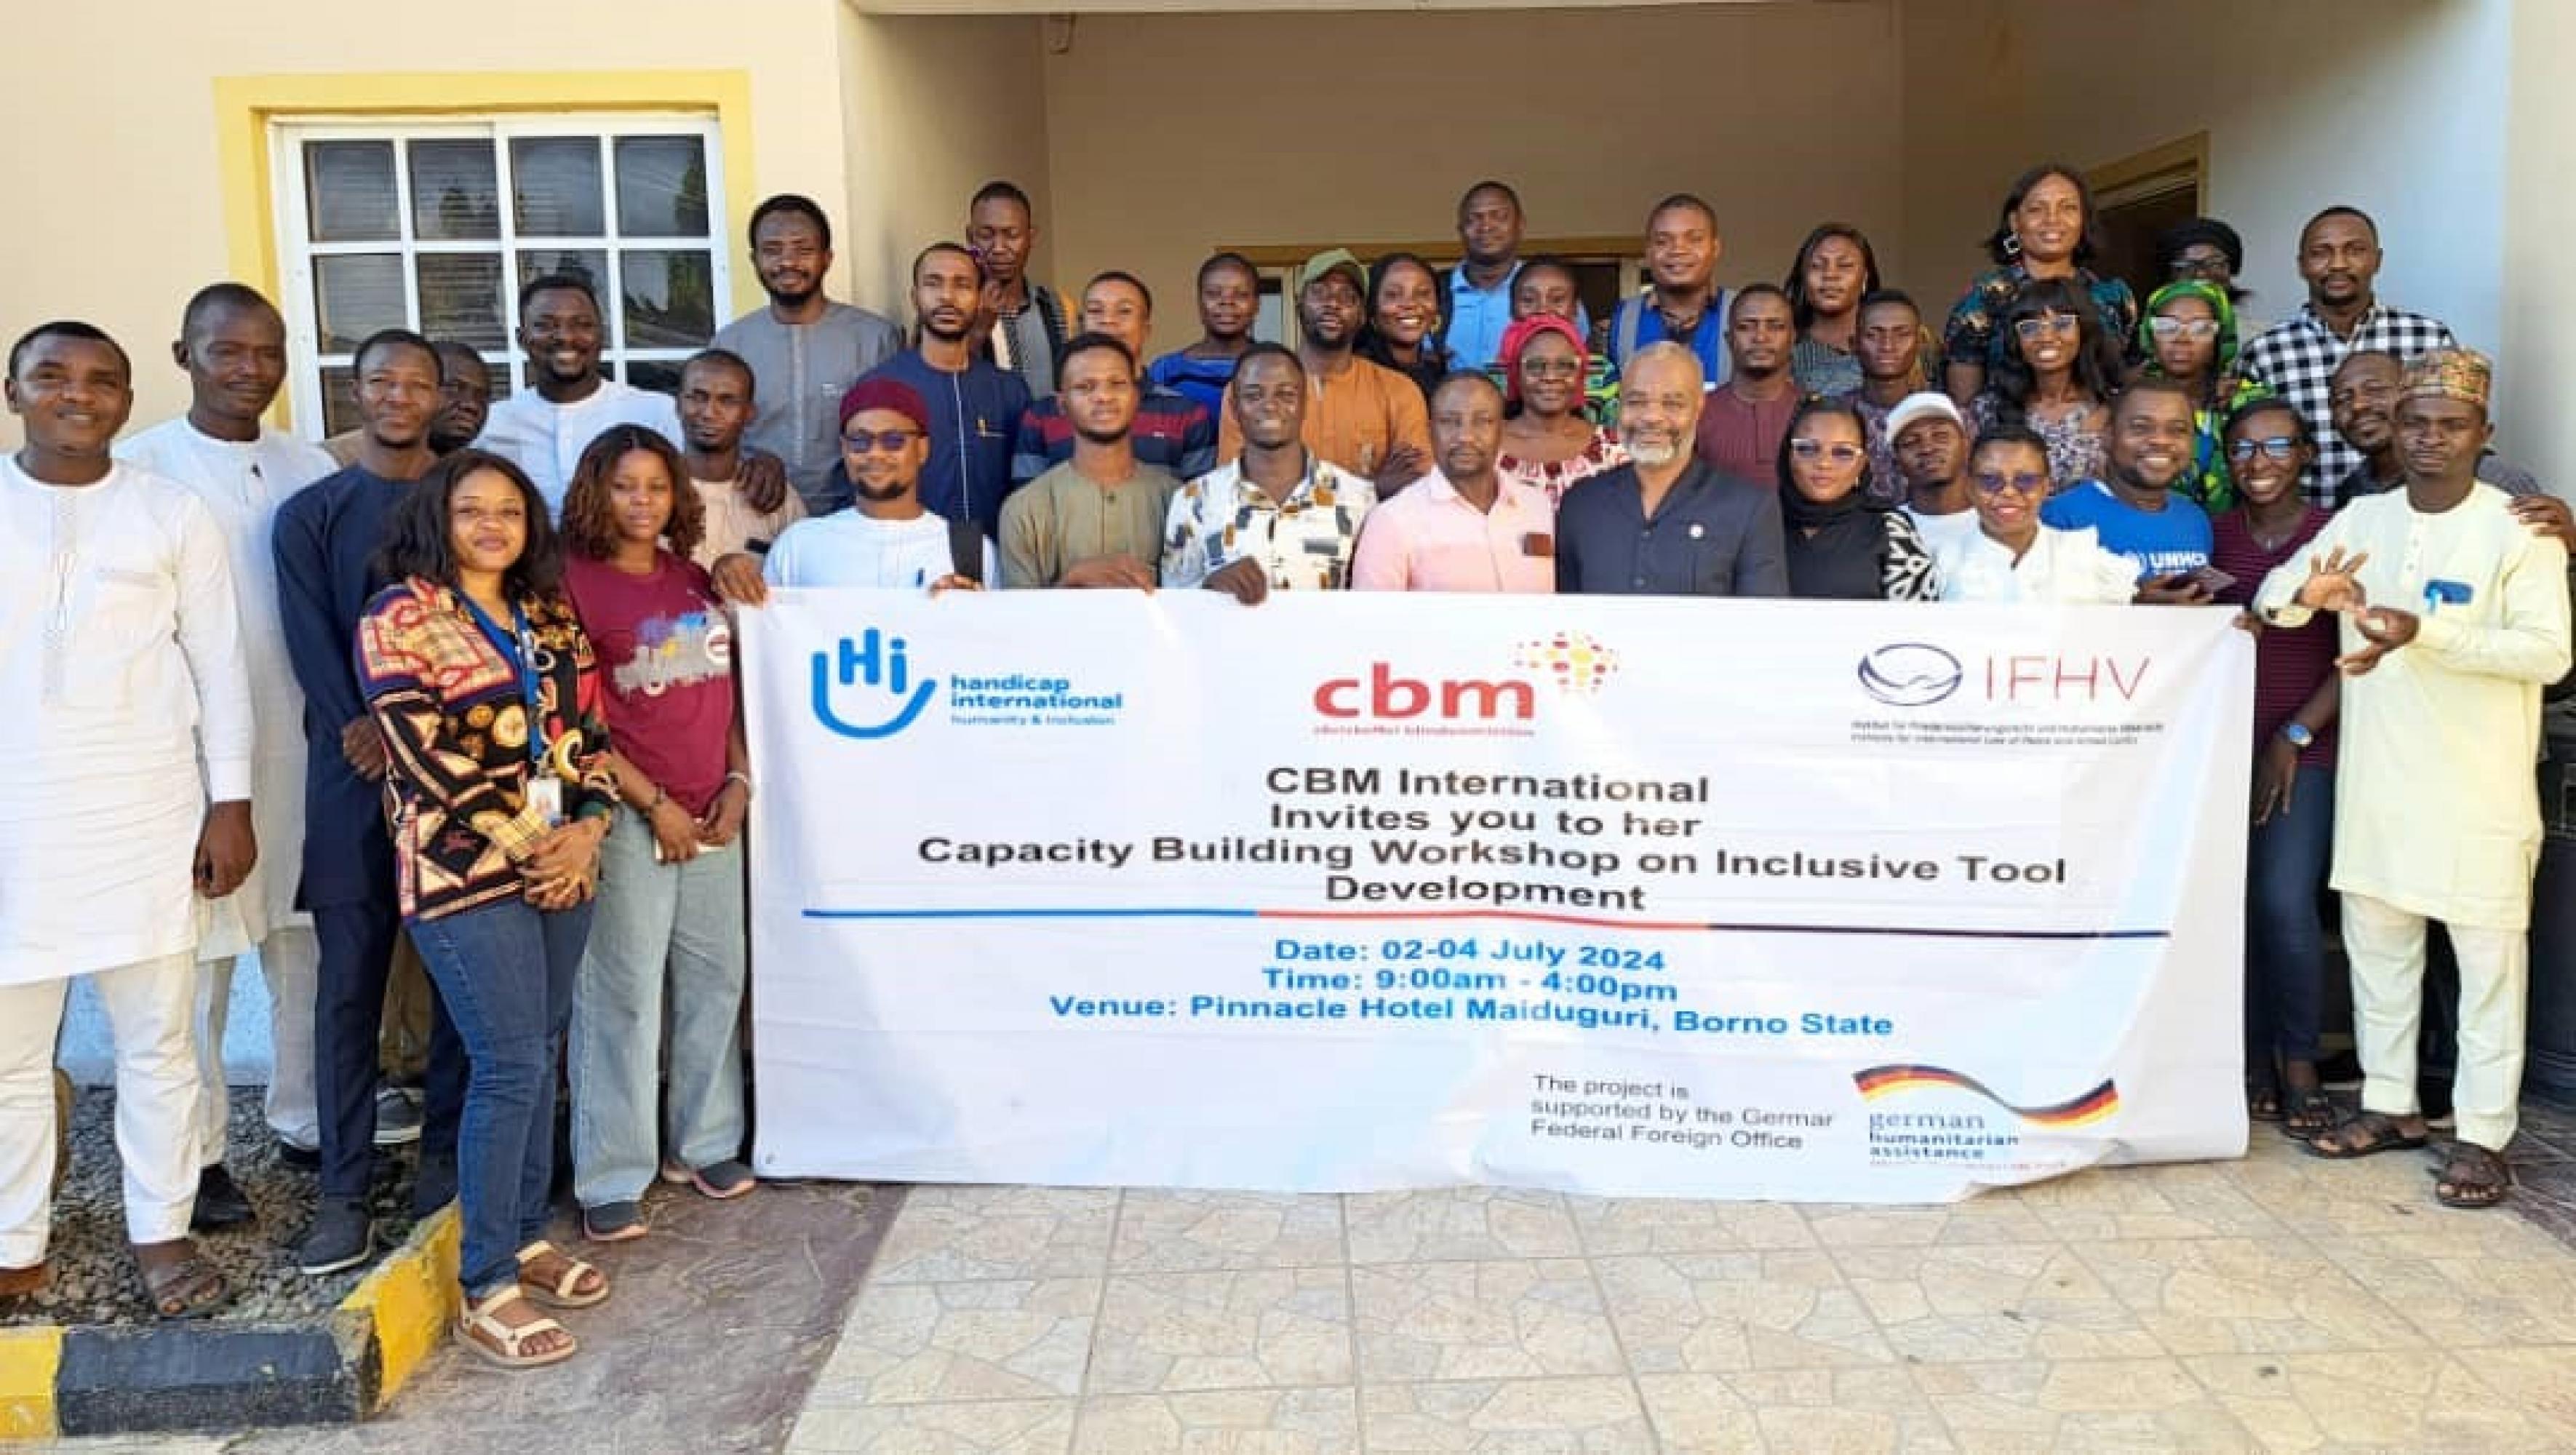 A group of training participants holding a training banner at the entrance of a training venue in Nigeria